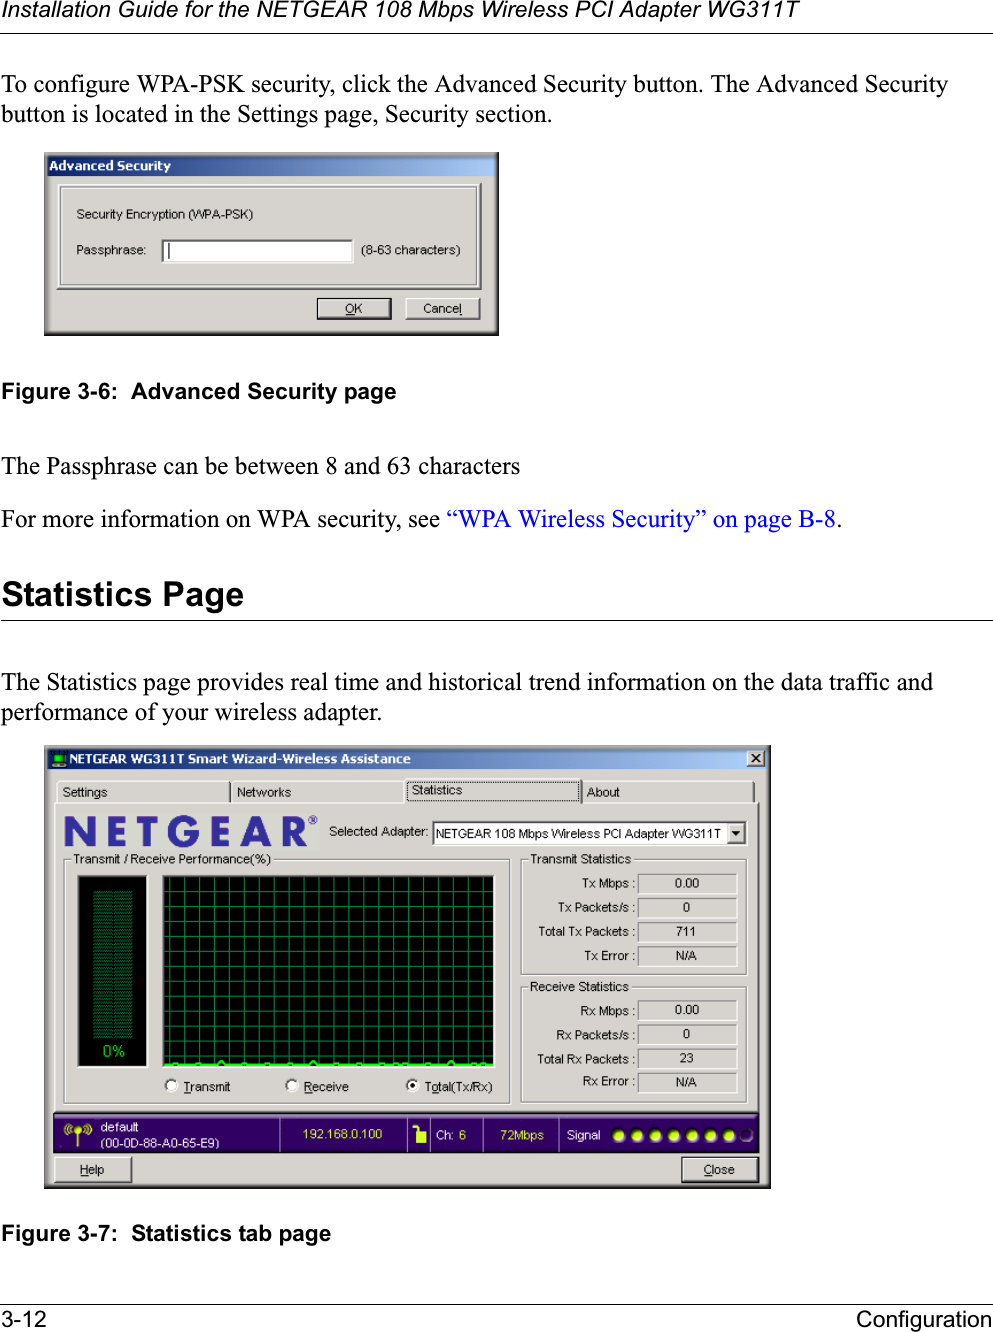 Installation Guide for the NETGEAR 108 Mbps Wireless PCI Adapter WG311T3-12 ConfigurationTo configure WPA-PSK security, click the Advanced Security button. The Advanced Security button is located in the Settings page, Security section. Figure 3-6:  Advanced Security pageThe Passphrase can be between 8 and 63 charactersFor more information on WPA security, see “WPA Wireless Security” on page B-8.Statistics PageThe Statistics page provides real time and historical trend information on the data traffic and performance of your wireless adapter. Figure 3-7:  Statistics tab page